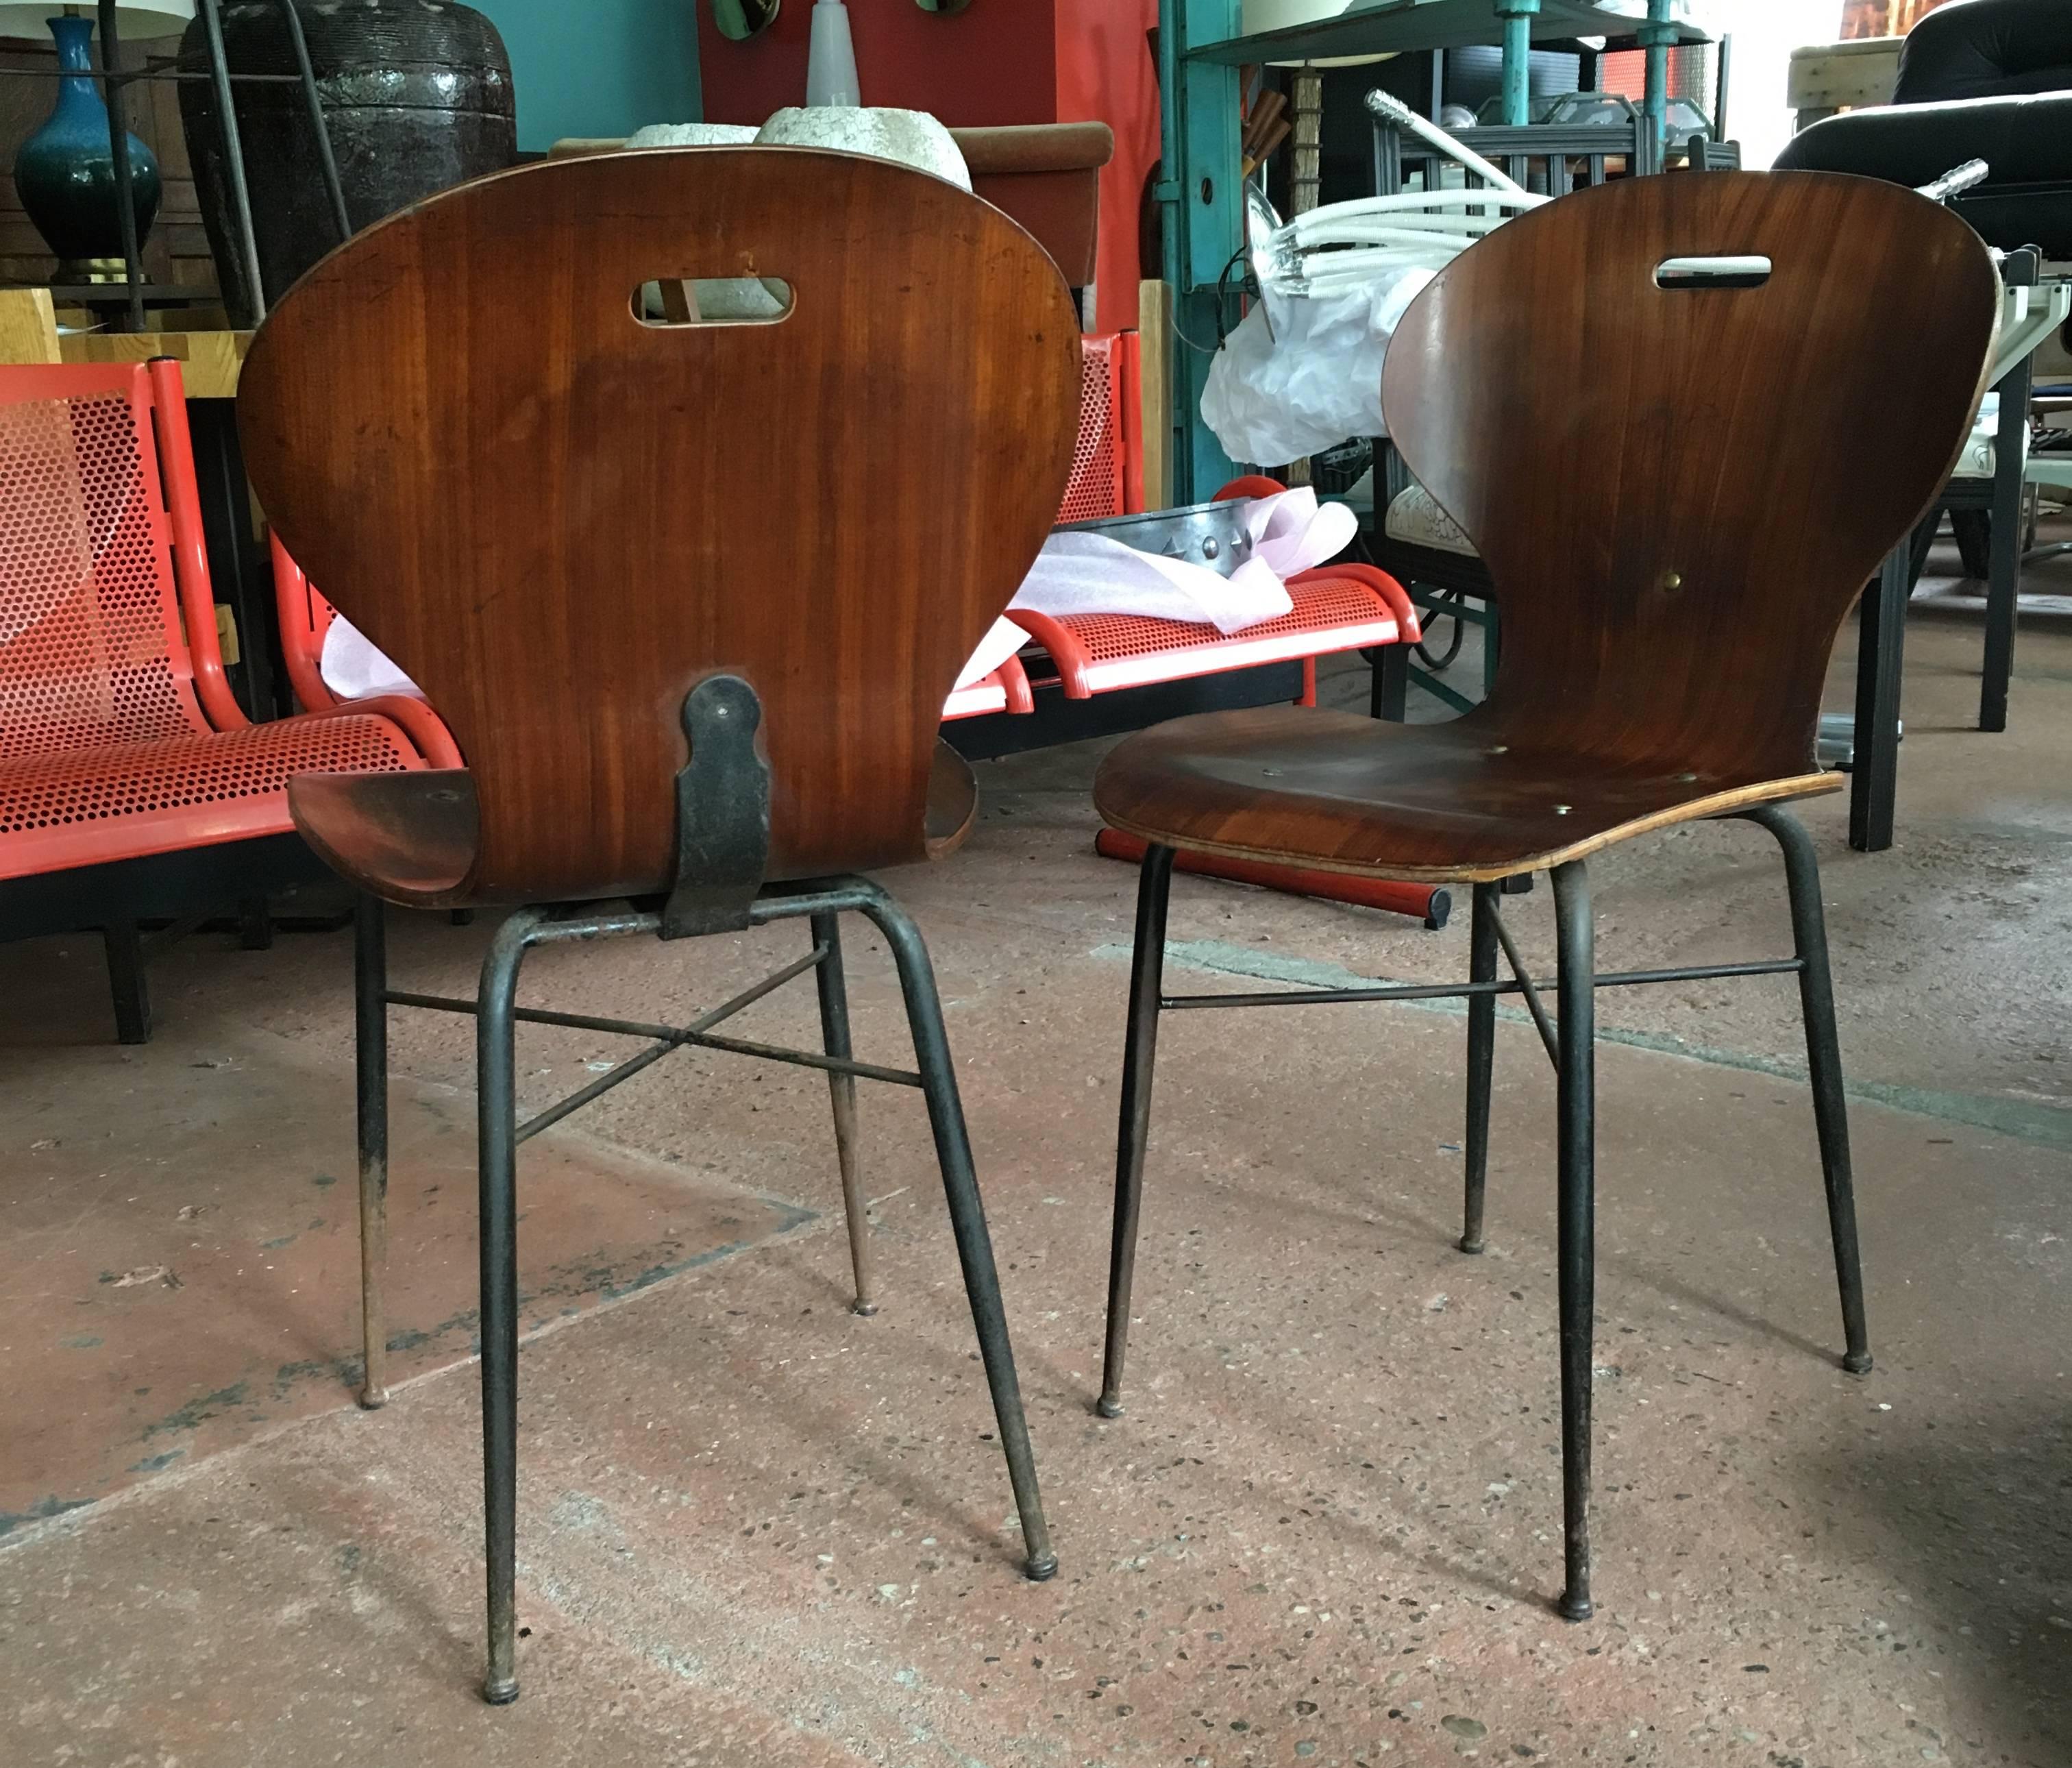 Rare and large grouping of early Carlo Ratti molded plywood chairs ; seat height, tapered iron leg and interesting strap hinge detail on the back. All in original condition.
Avantgarden Ltd. cultivates unexpected and exceptional lighting, furniture